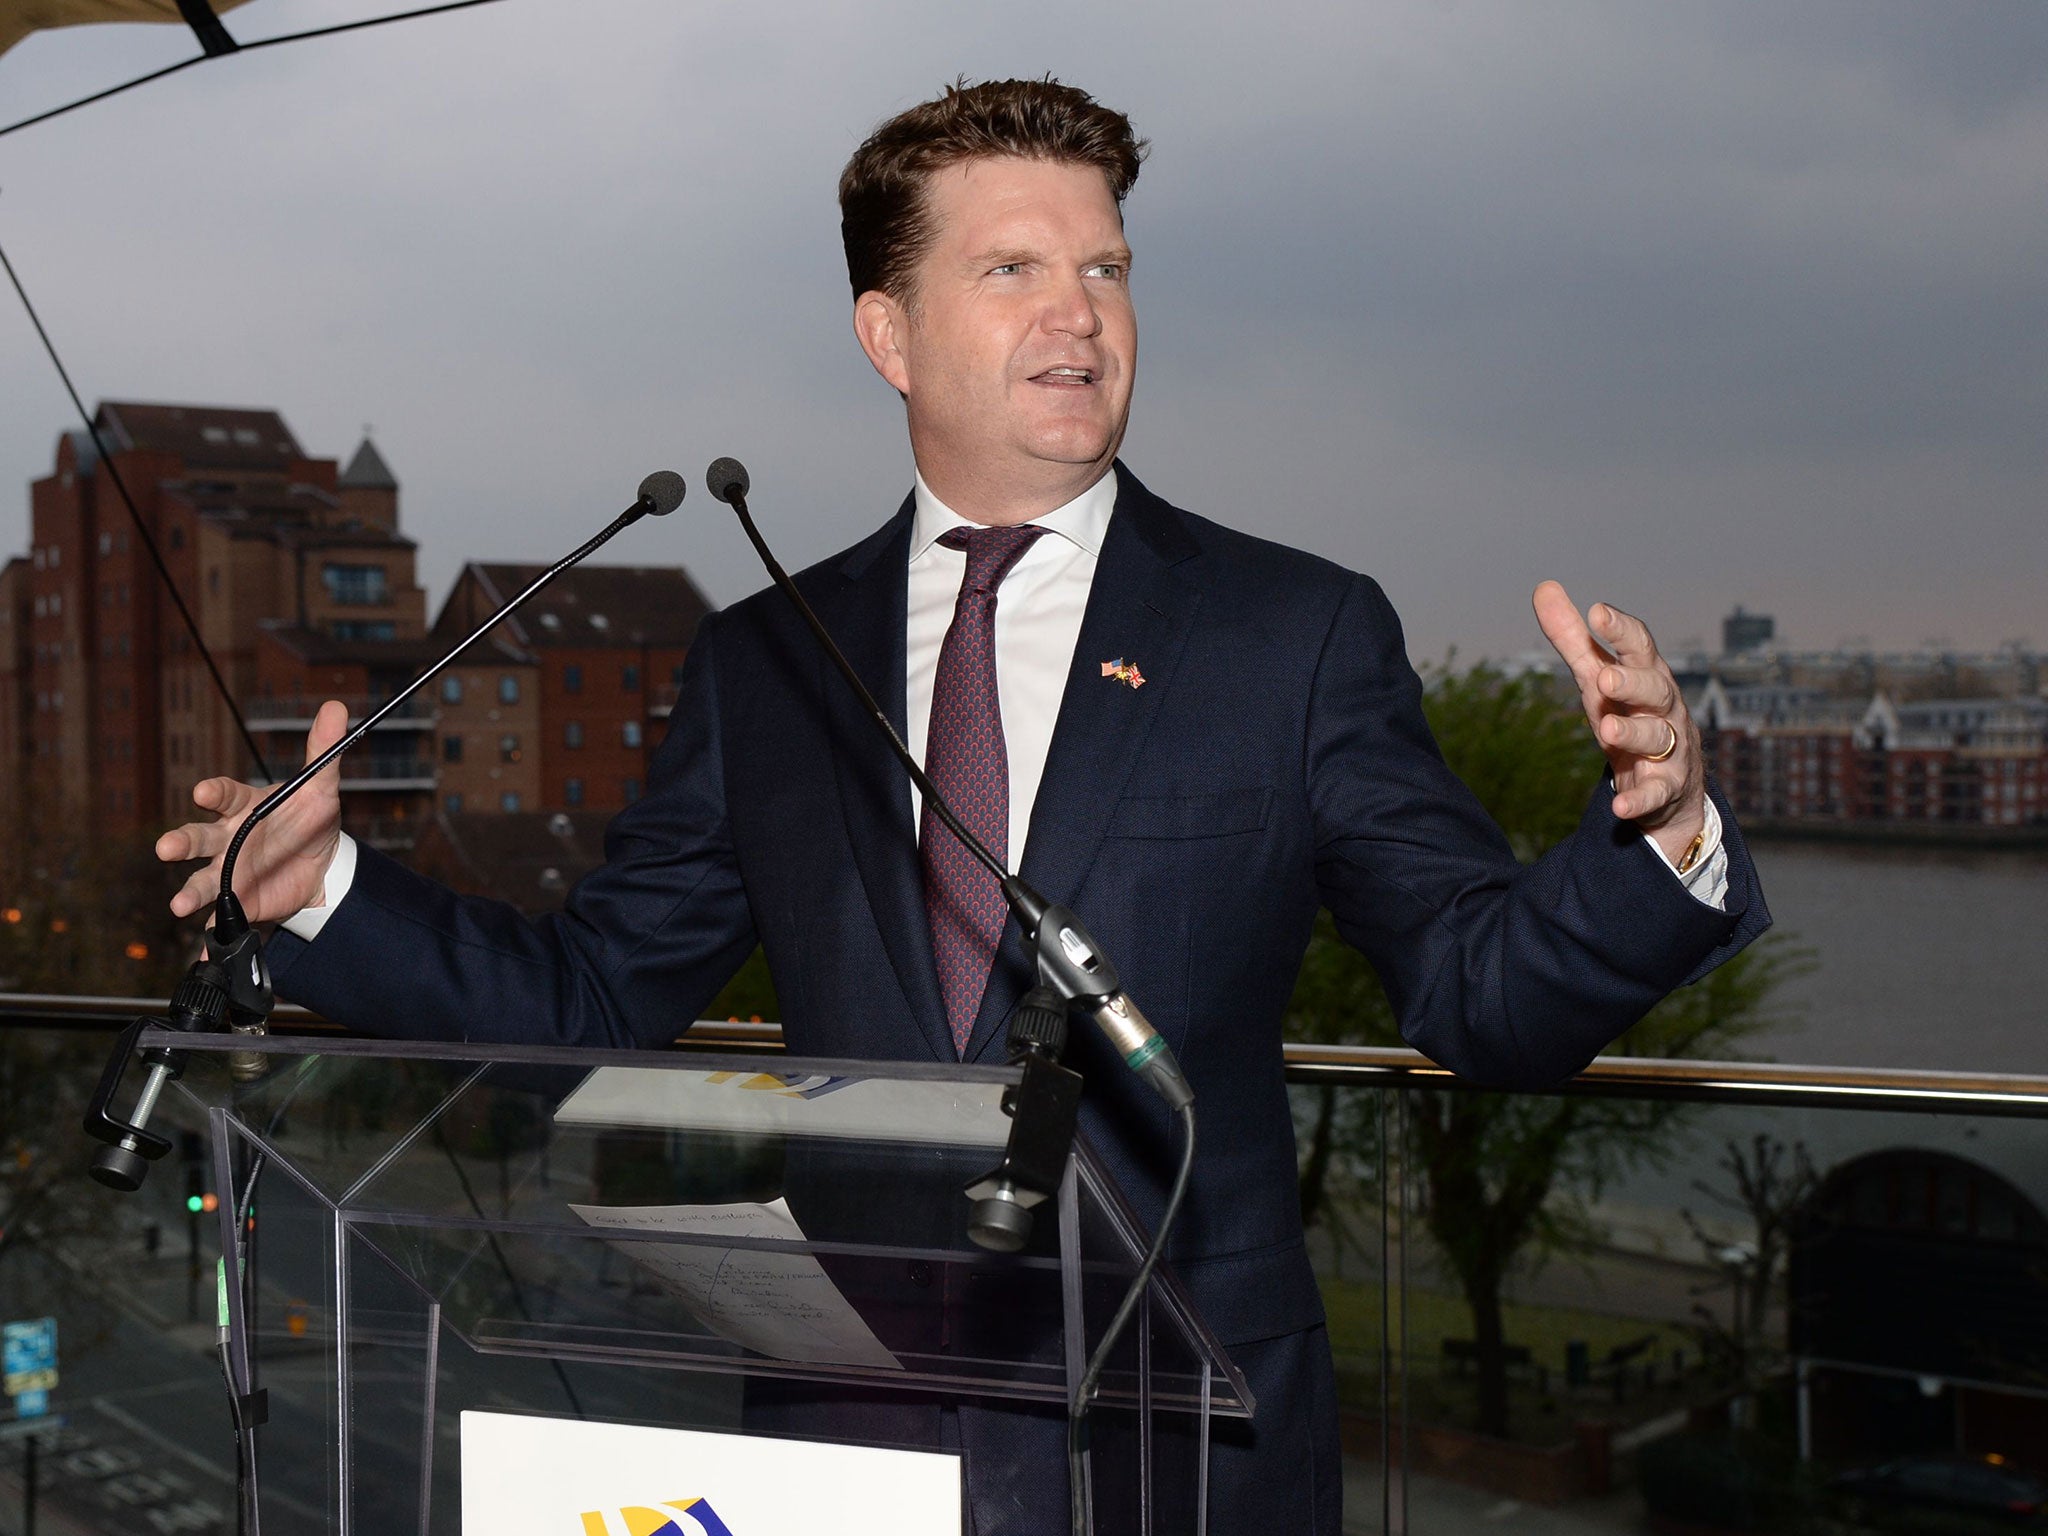 Barzun has hosted events at his Regent's Park residence, where fried catfish and corn dog canapés were served